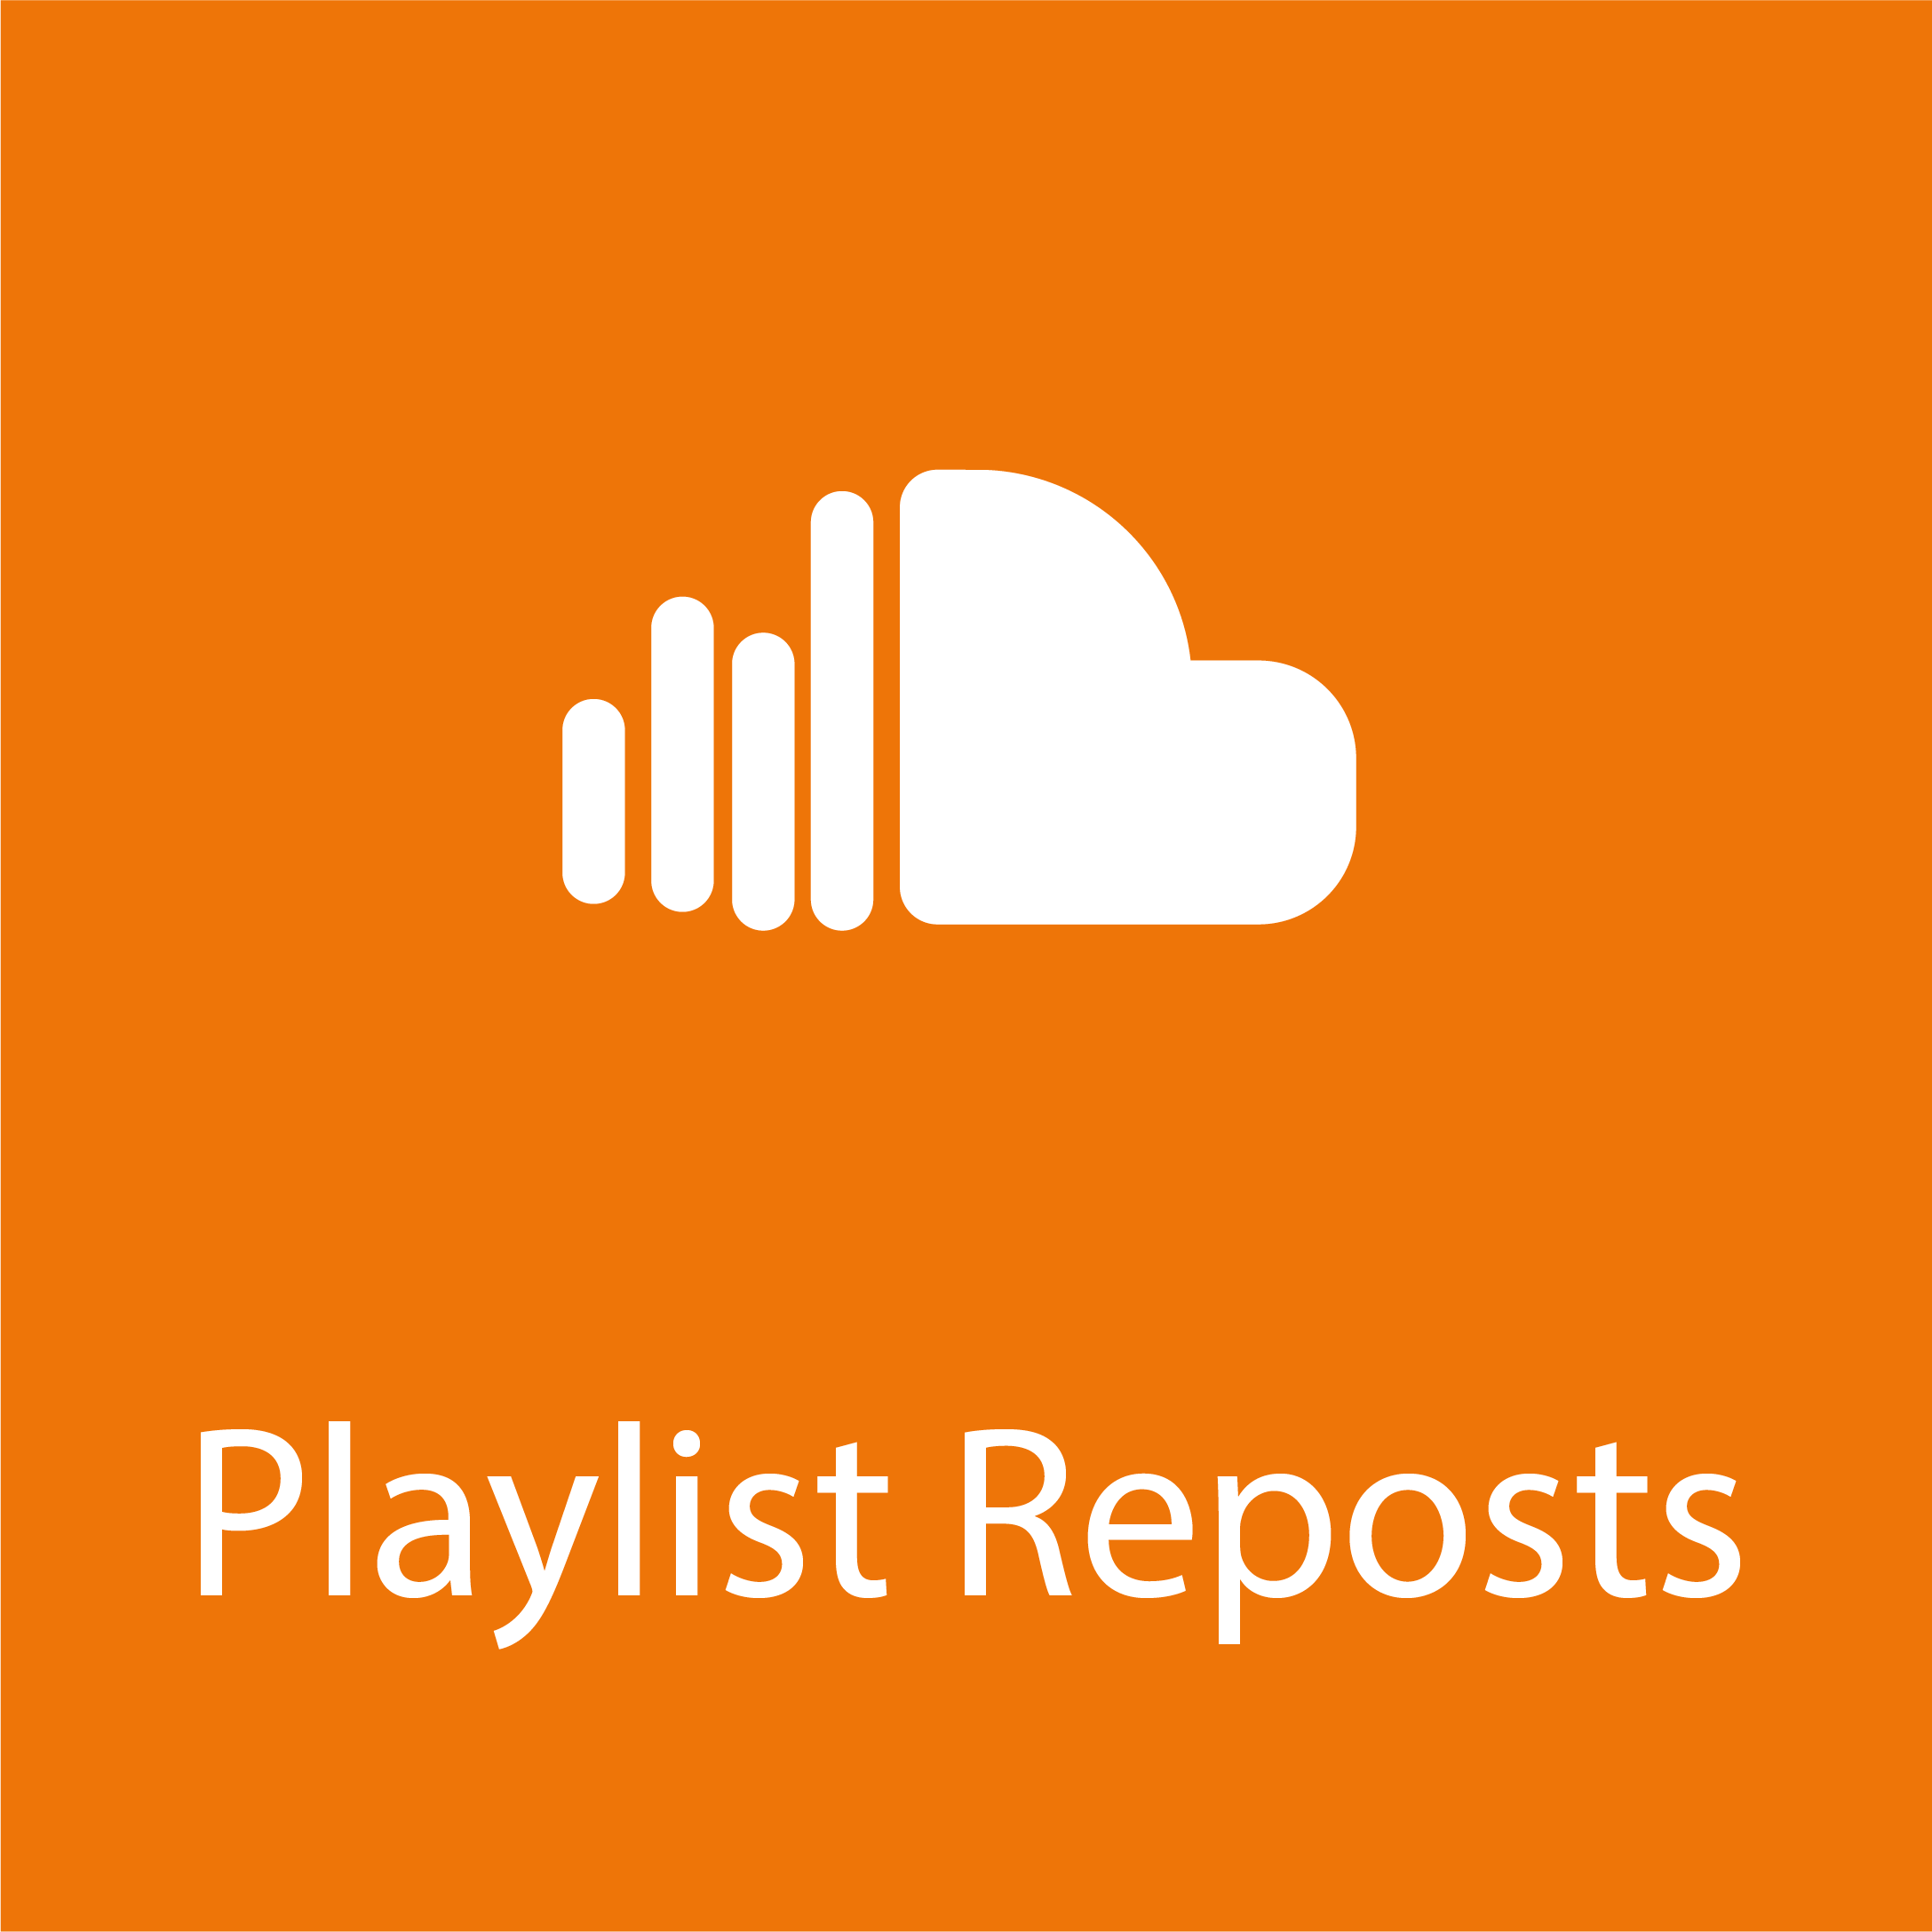 download soundcloud playlist all at once